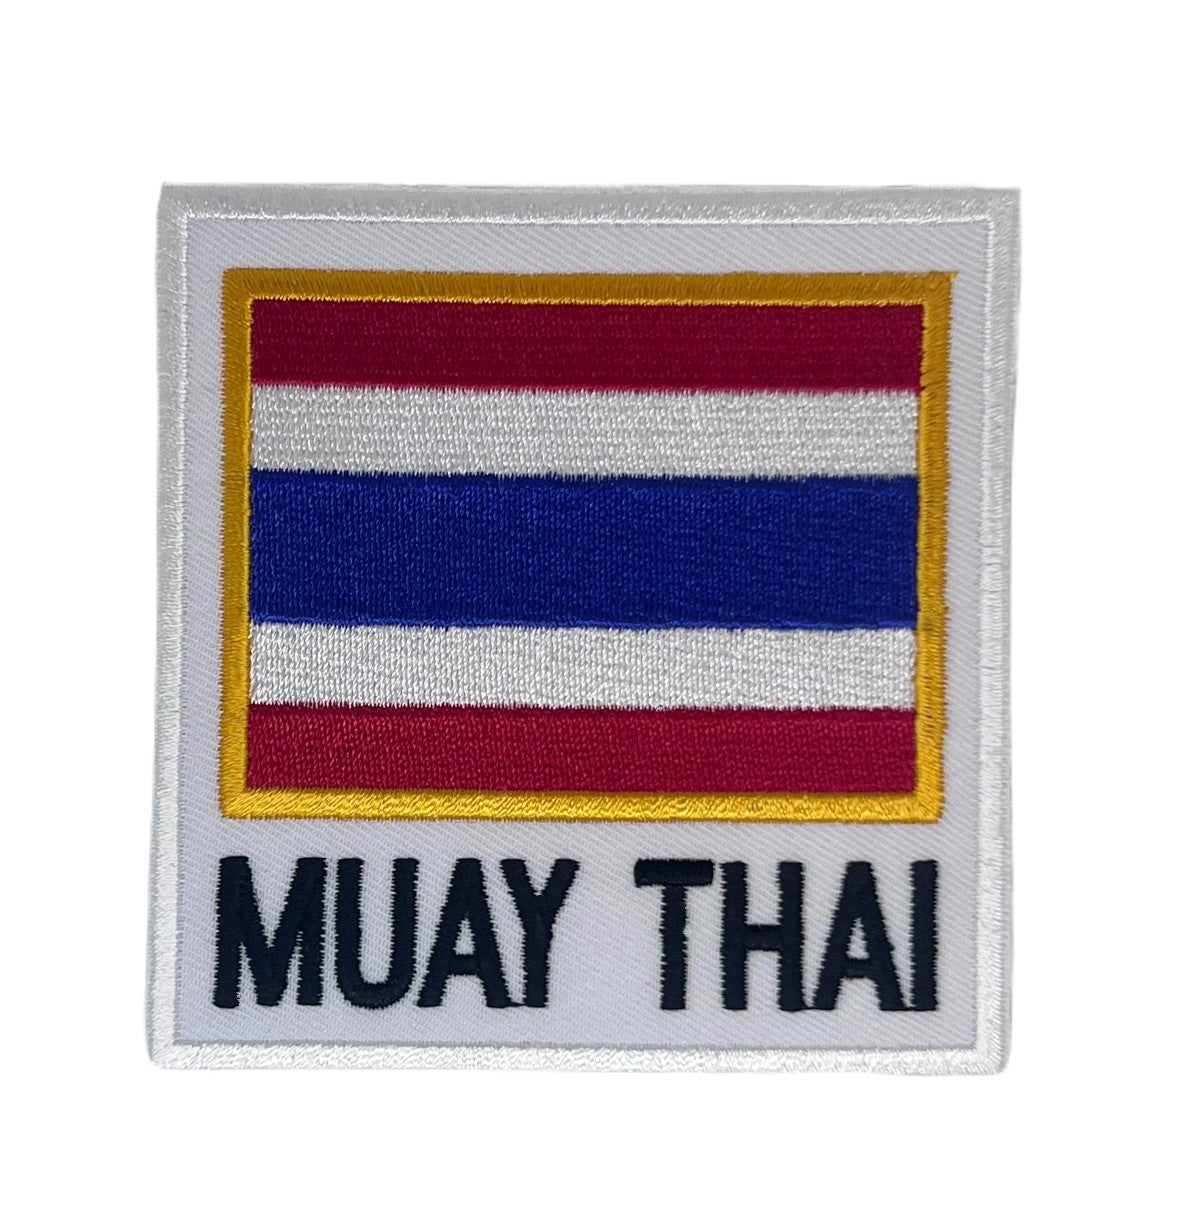 Muay Thai Patch (3.5 Inch) Embroidered Iron or Sew-on Badge Souvenir of Thailand Martial Arts Thai Boxing Lumpini Stadium Gift Patches